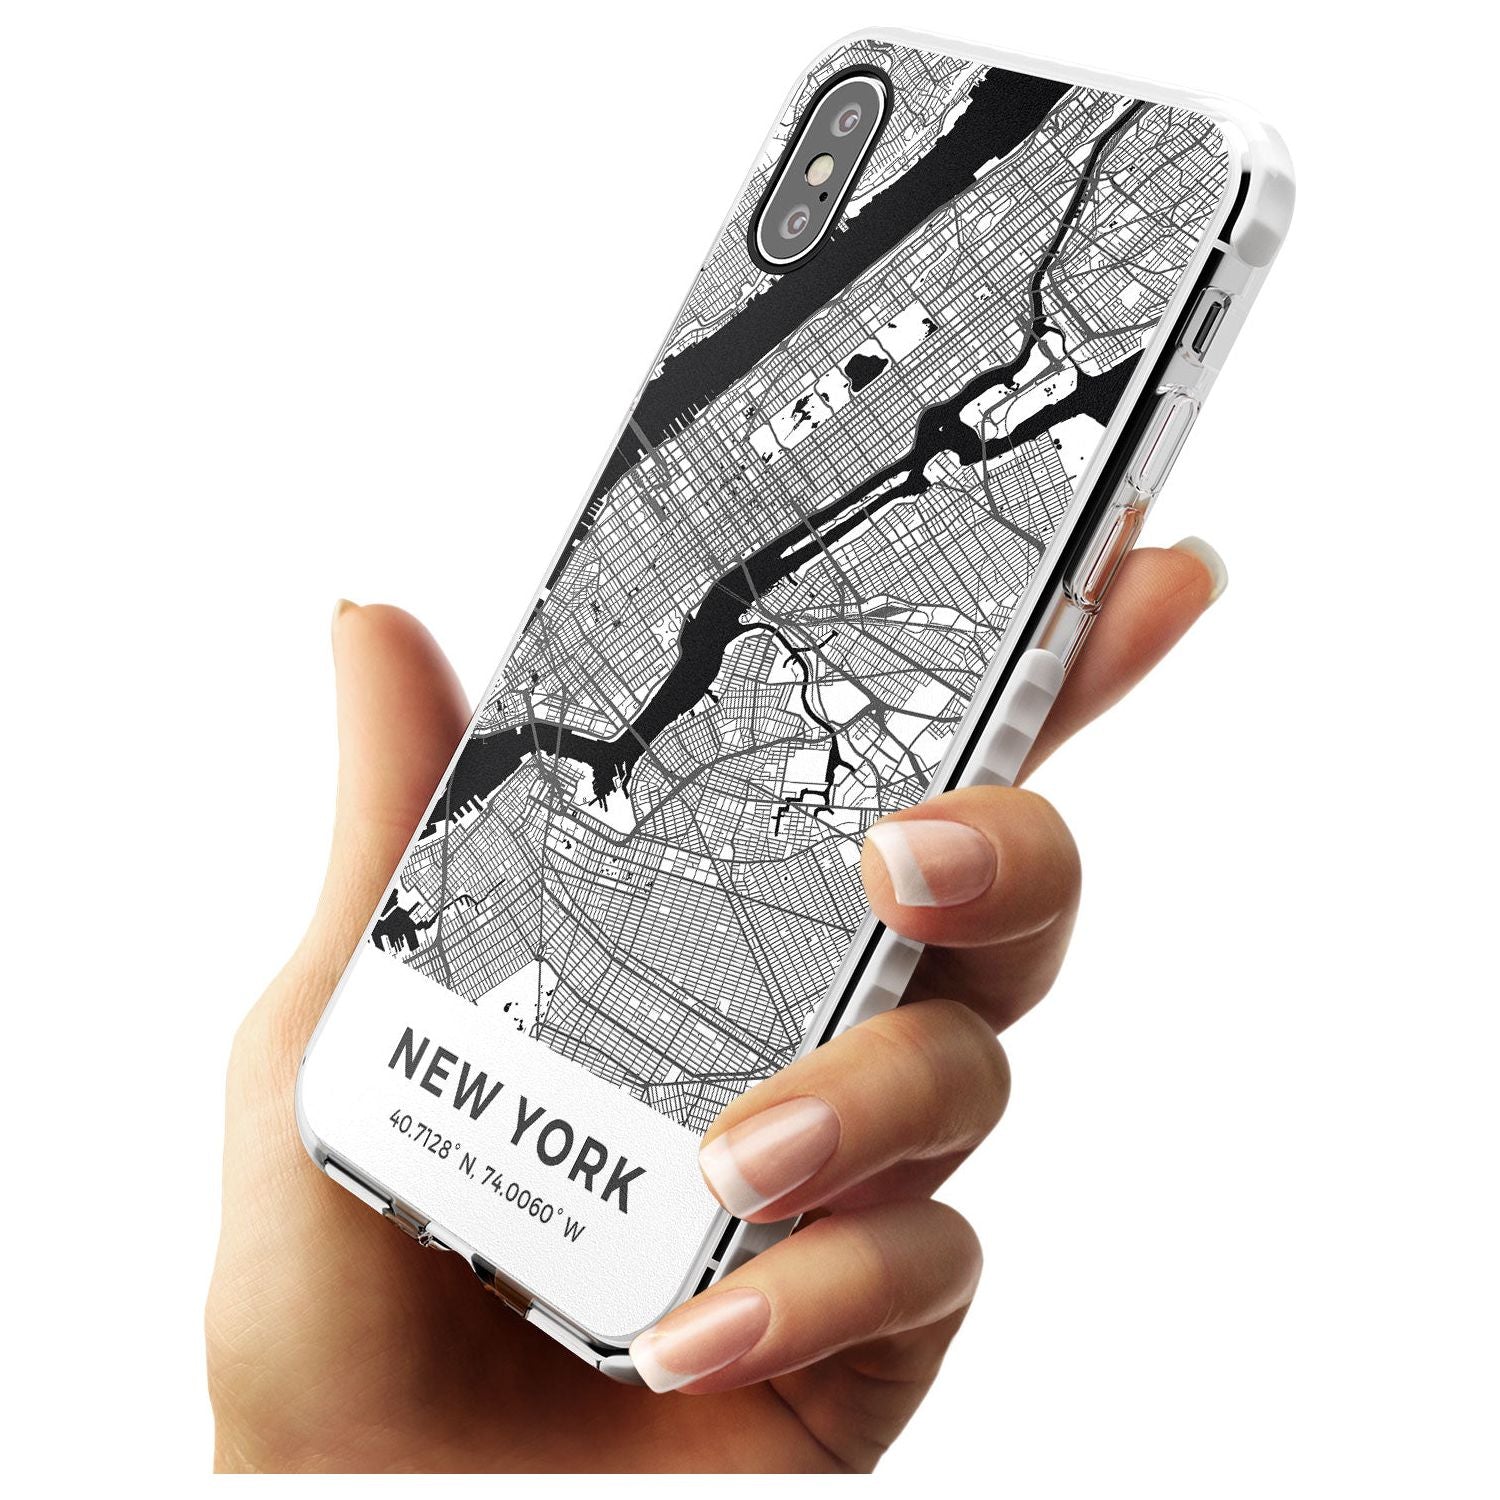 Map of New York, New York Impact Phone Case for iPhone X XS Max XR